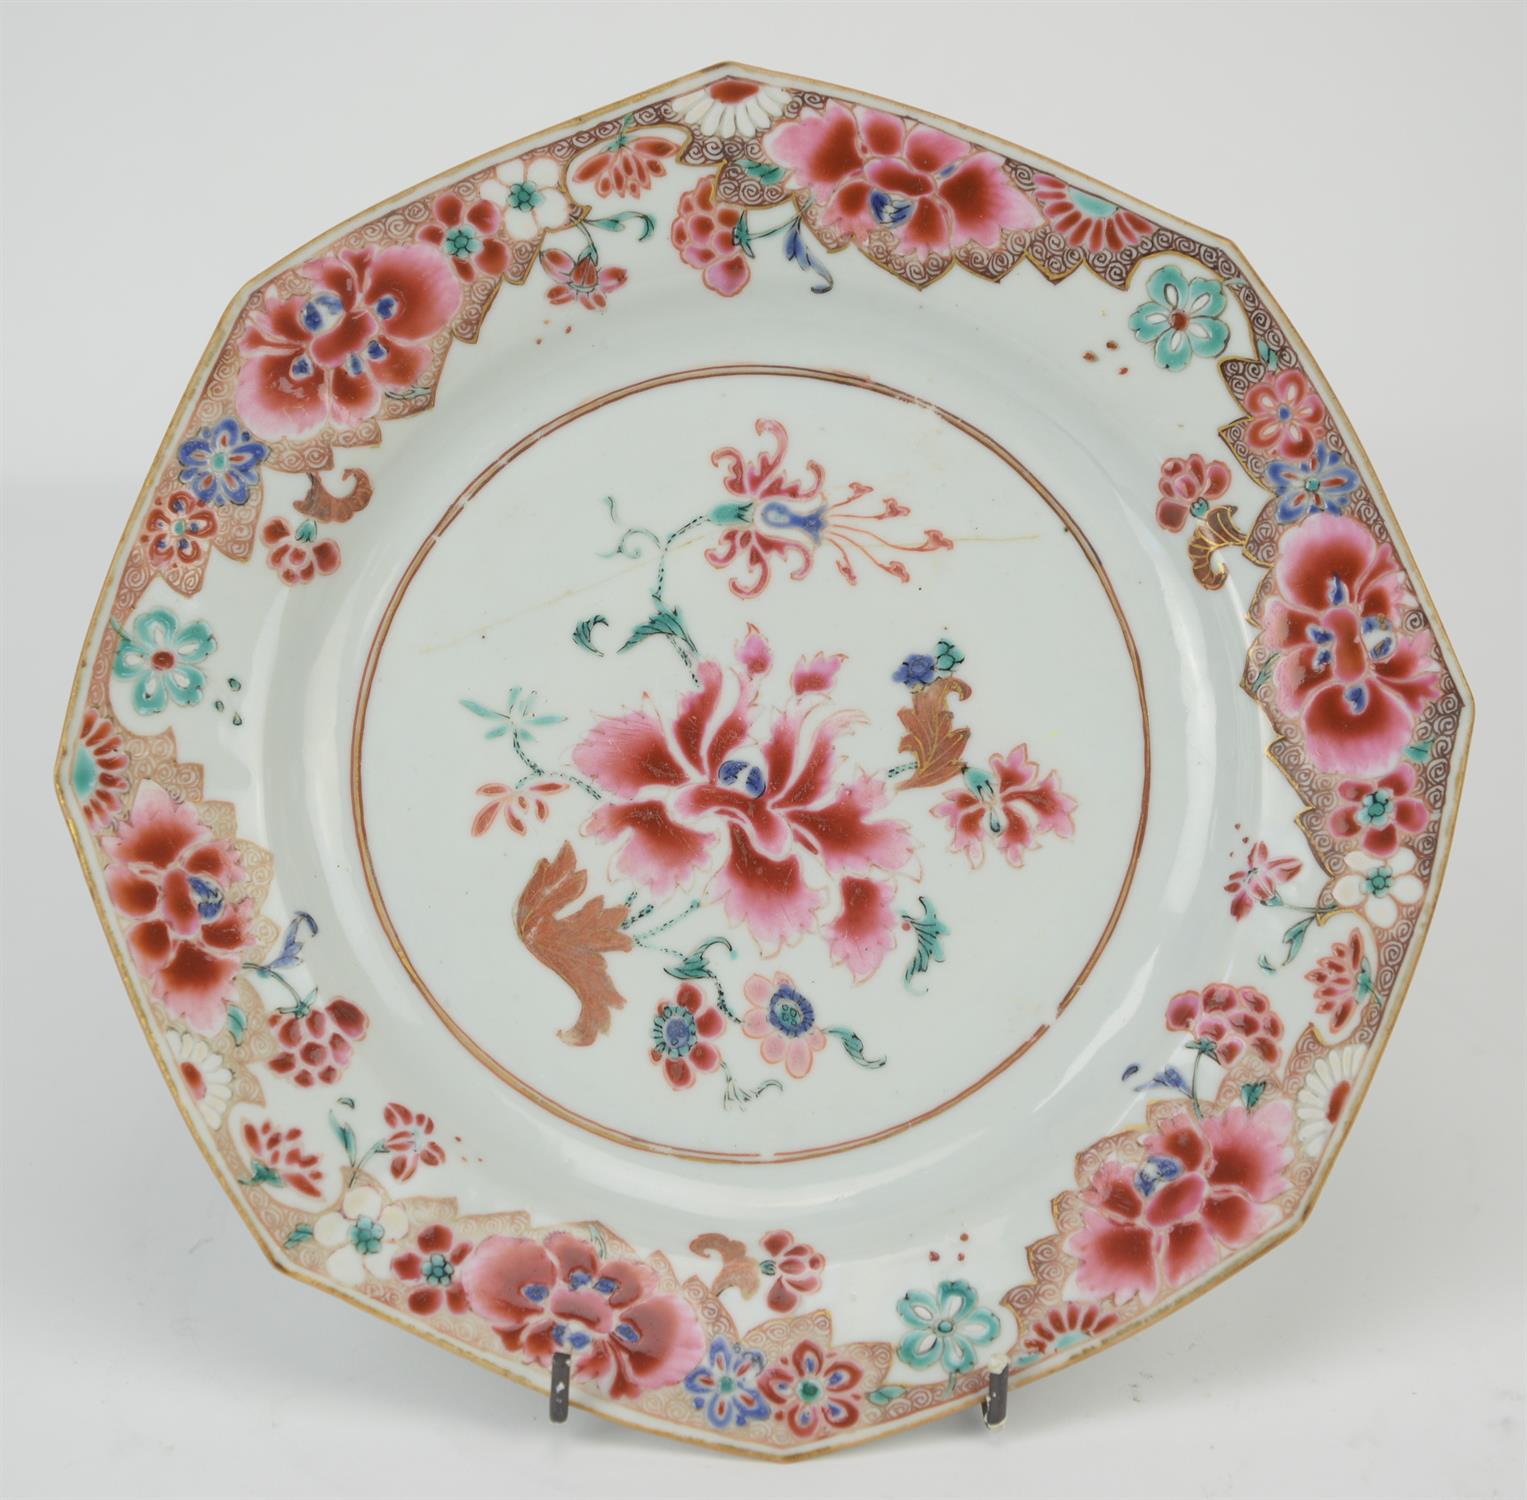 Eight famille rose dishes; each one decorated with floral designs and about 22.5 cm diameter, - Image 6 of 28